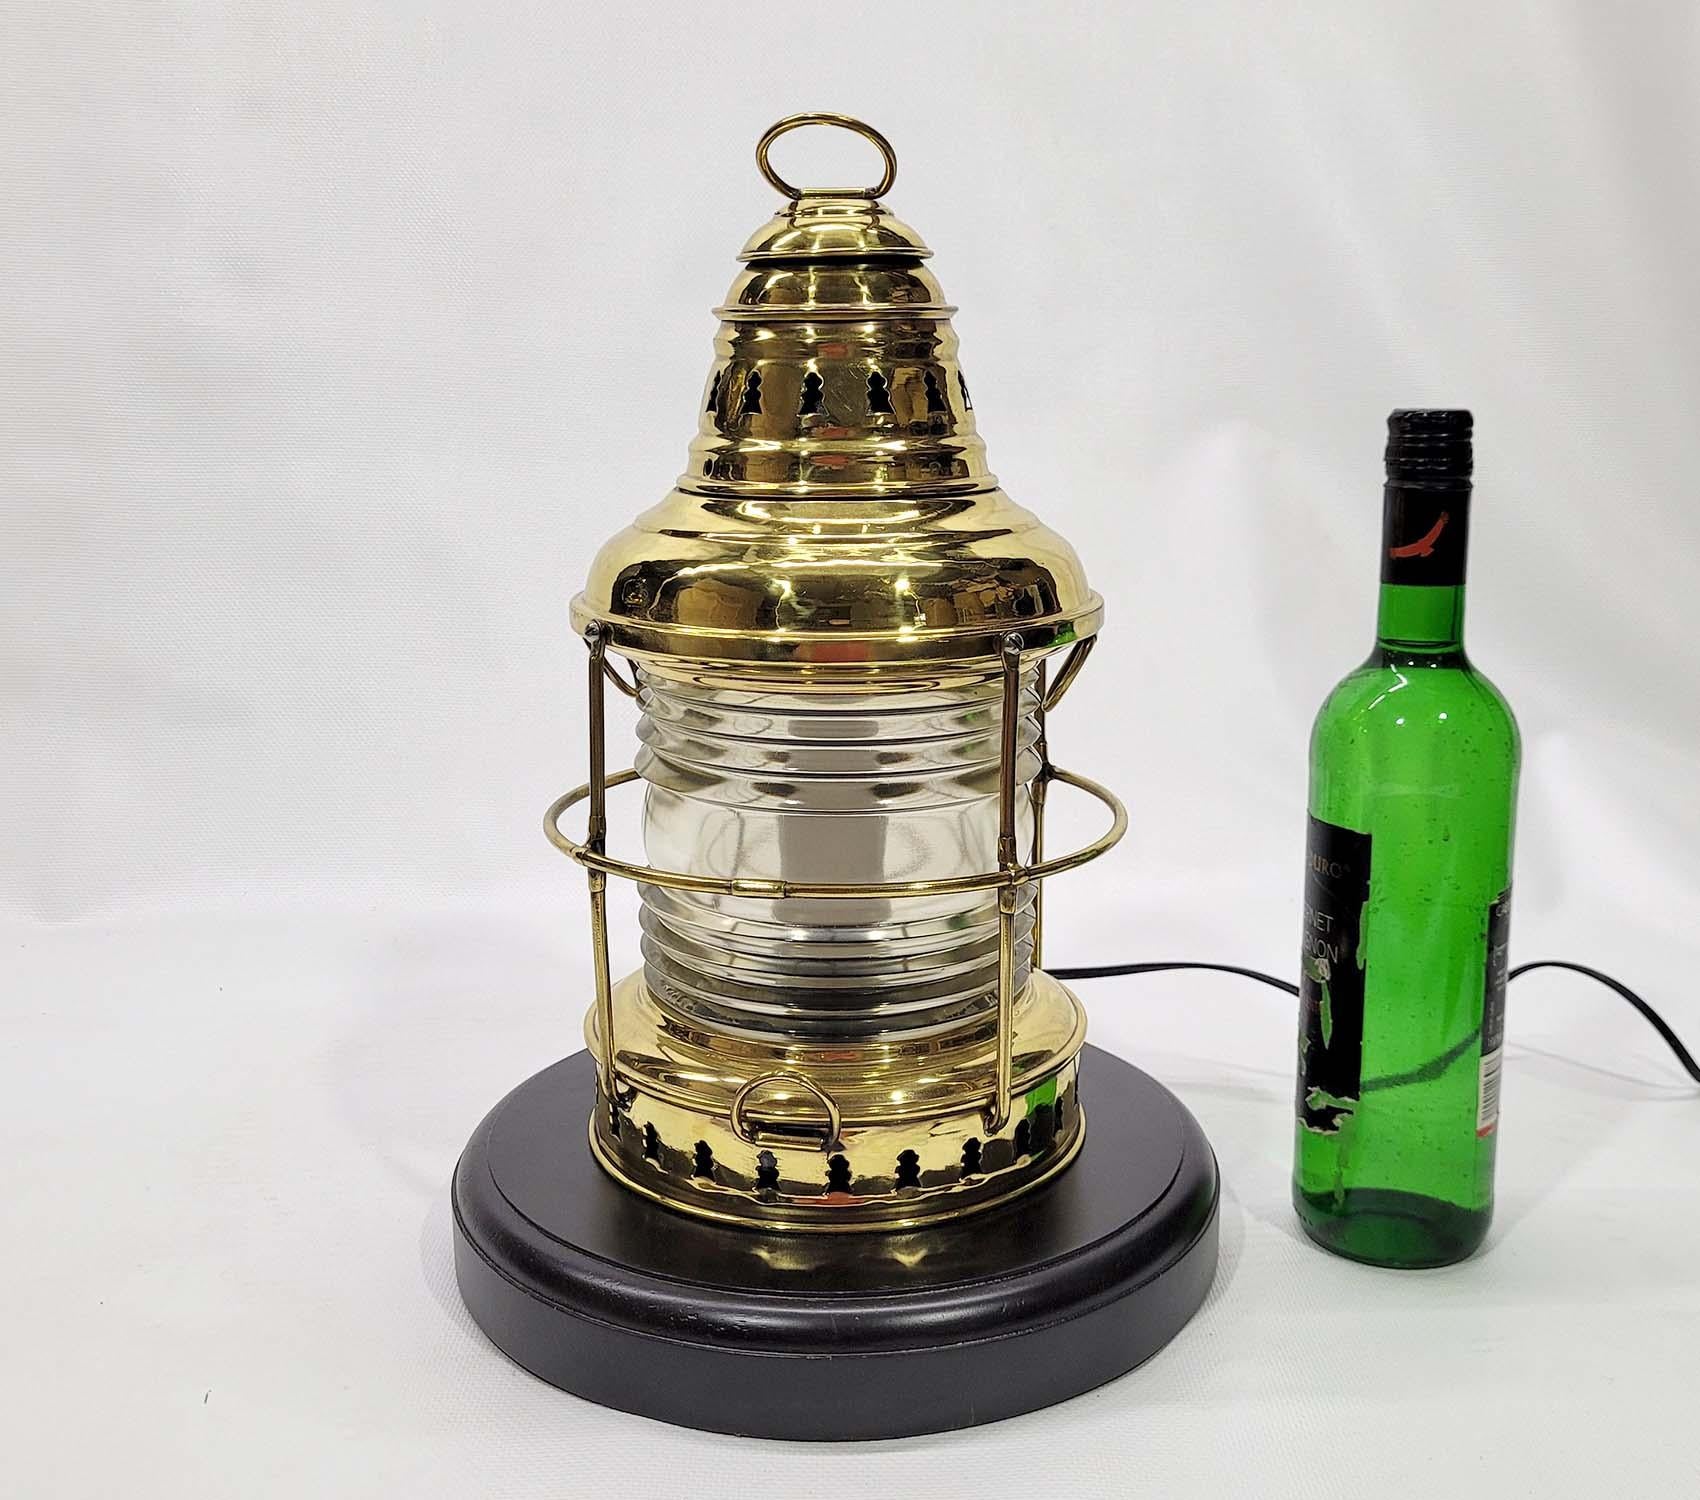 Solid brass marine lantern with Fresnel glass lens. Protective brass cage. This lantern has been meticulously polished and lacquered. It has been wired with a new socket and mounted to a thick wood base with rich finish. Beautiful finish. Circa